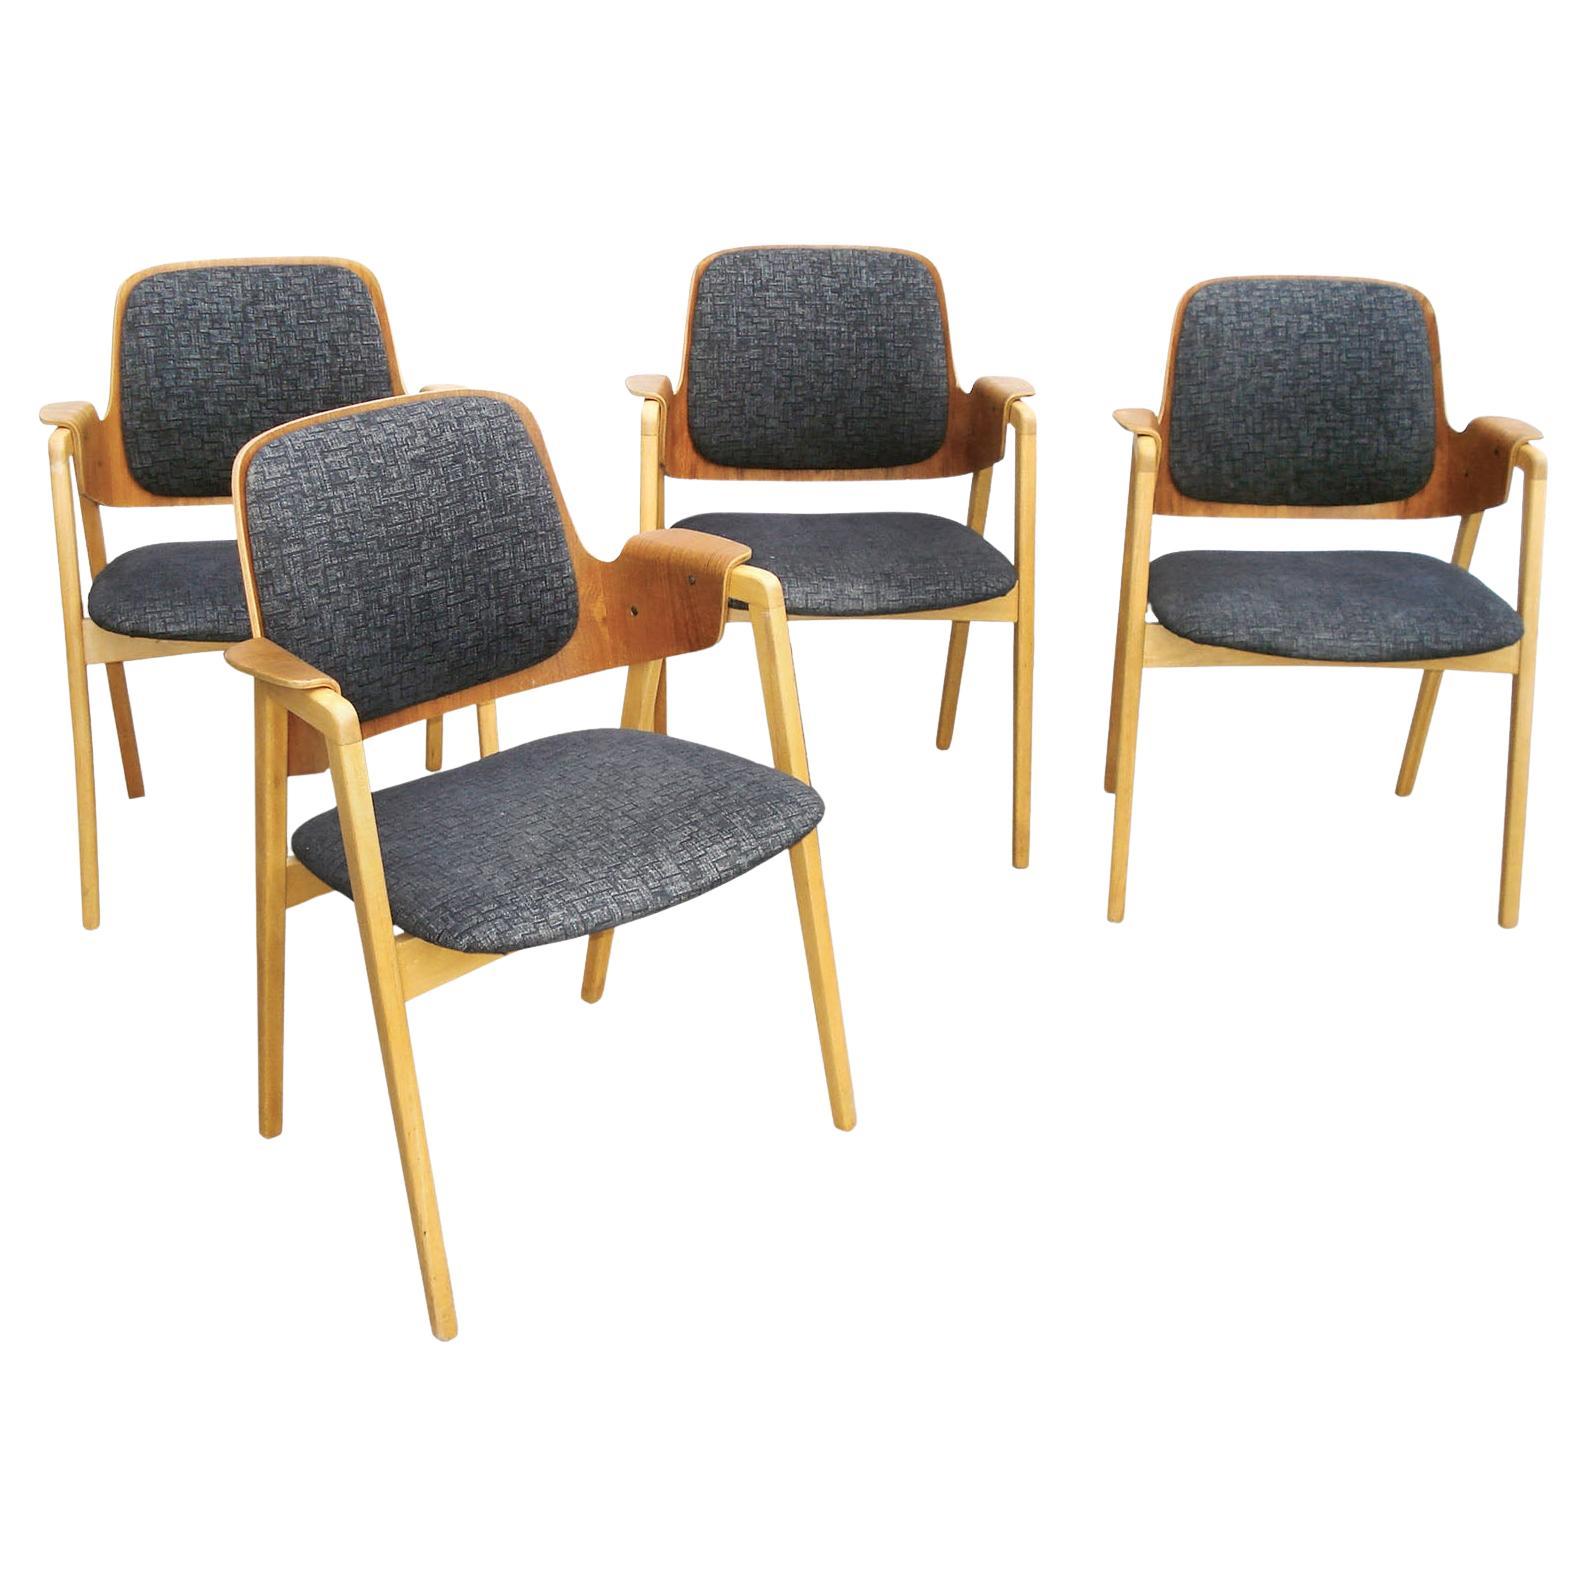 Set of 4 Elias Barup Teak Dining Chairs with Original Upholstery, 1950s Sweden